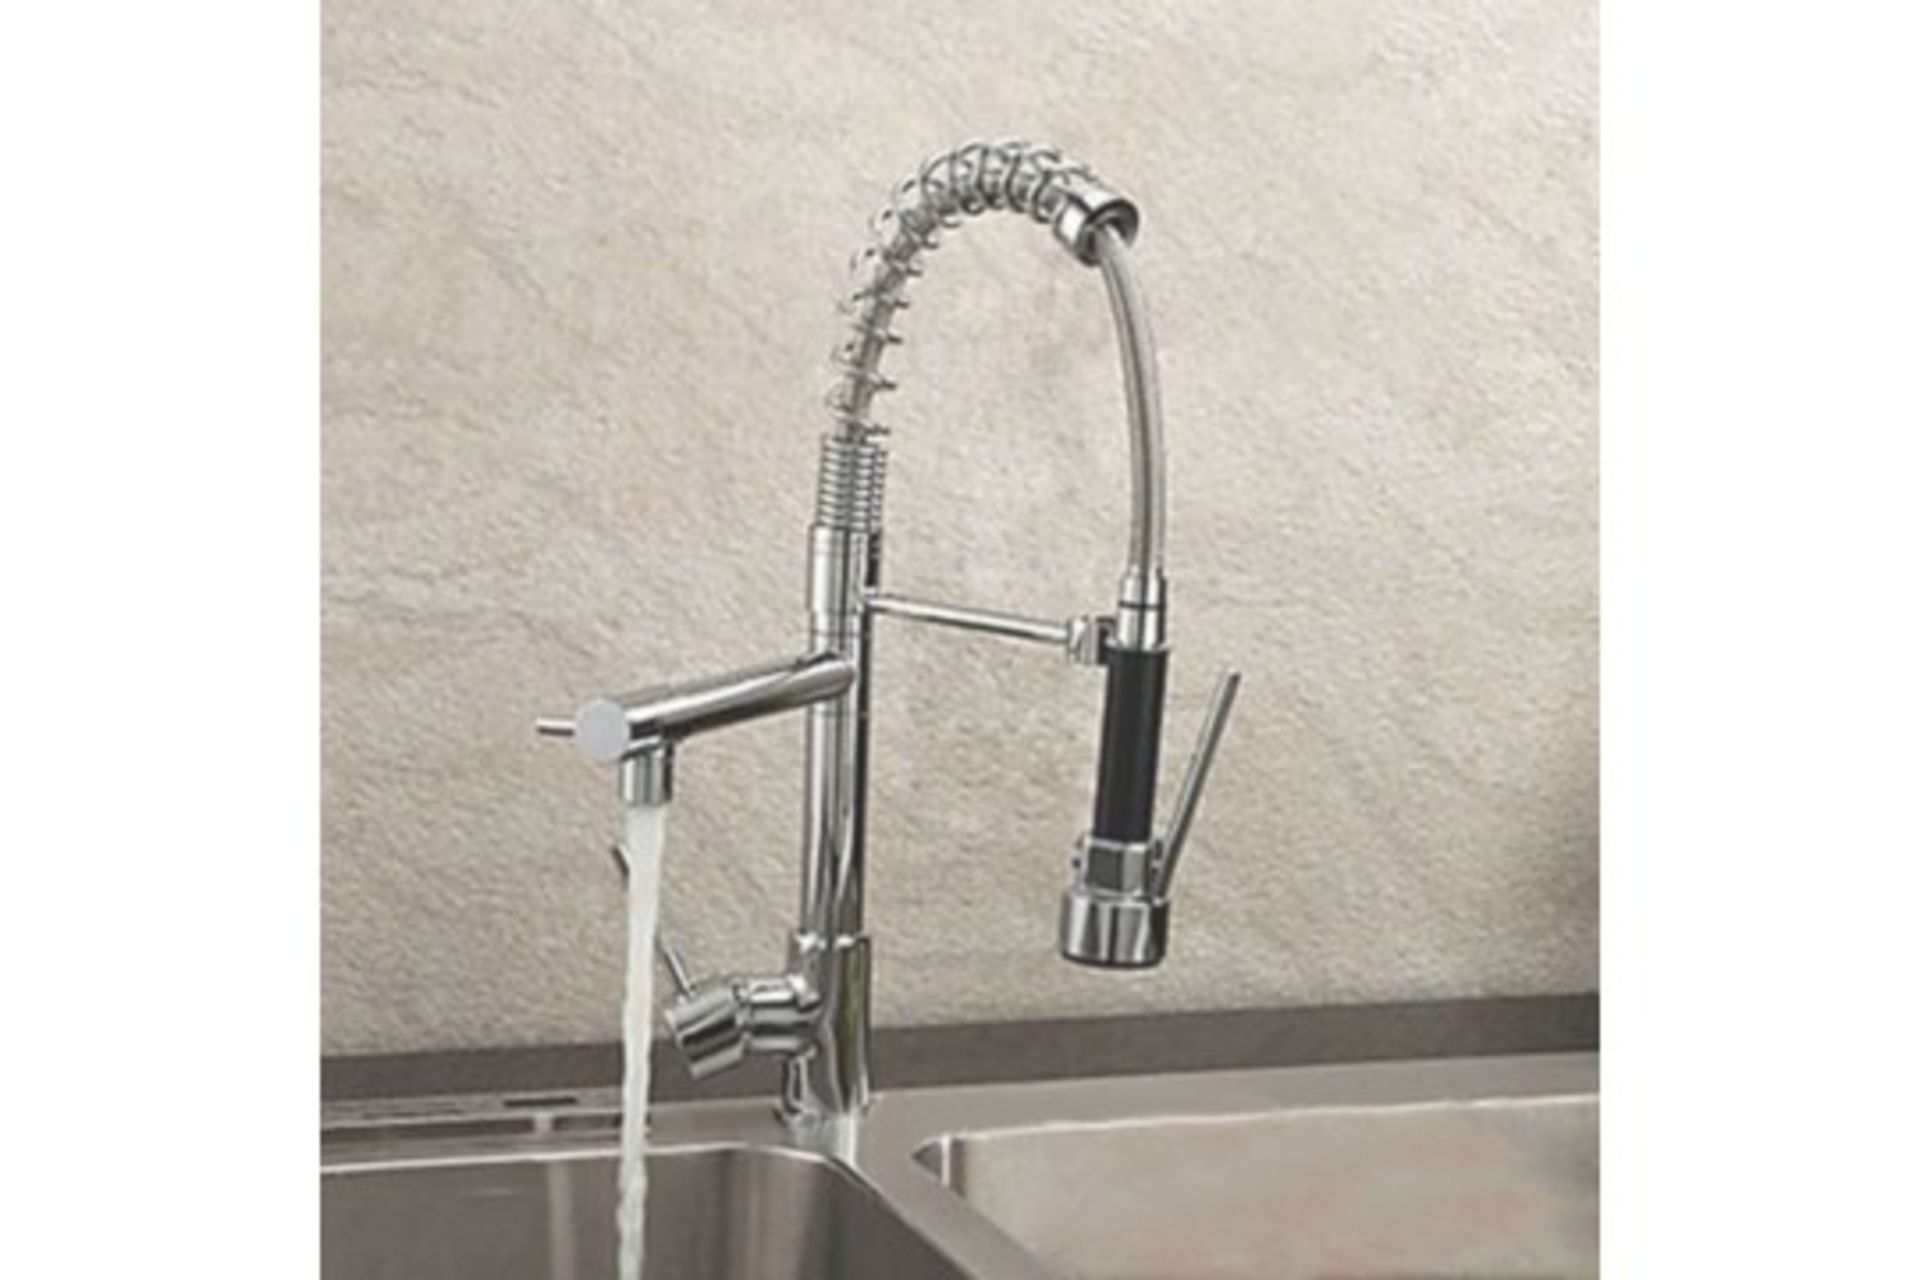 (QW222) Bentley Modern Monobloc Chrome Brass Pull Out Spray Mixer Tap. RRP £349.99. This tap is from